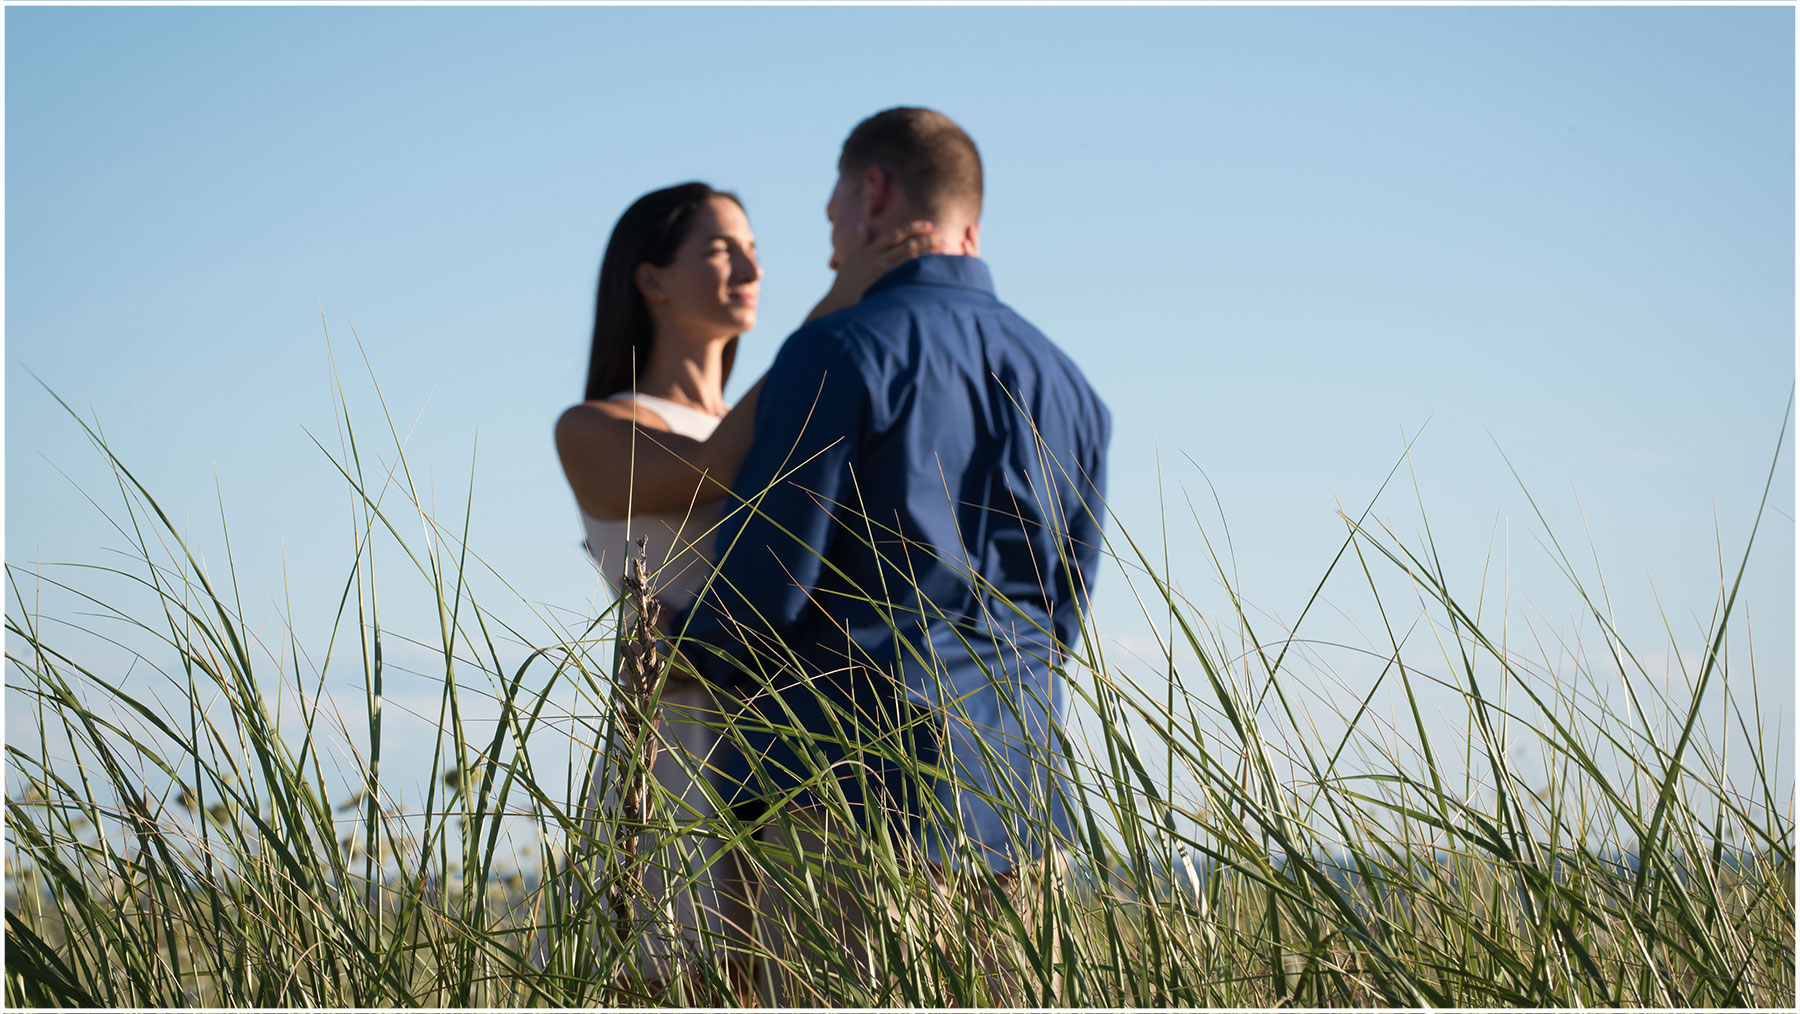 Kennebunkport Engagement Photographers - by Peter Greeno